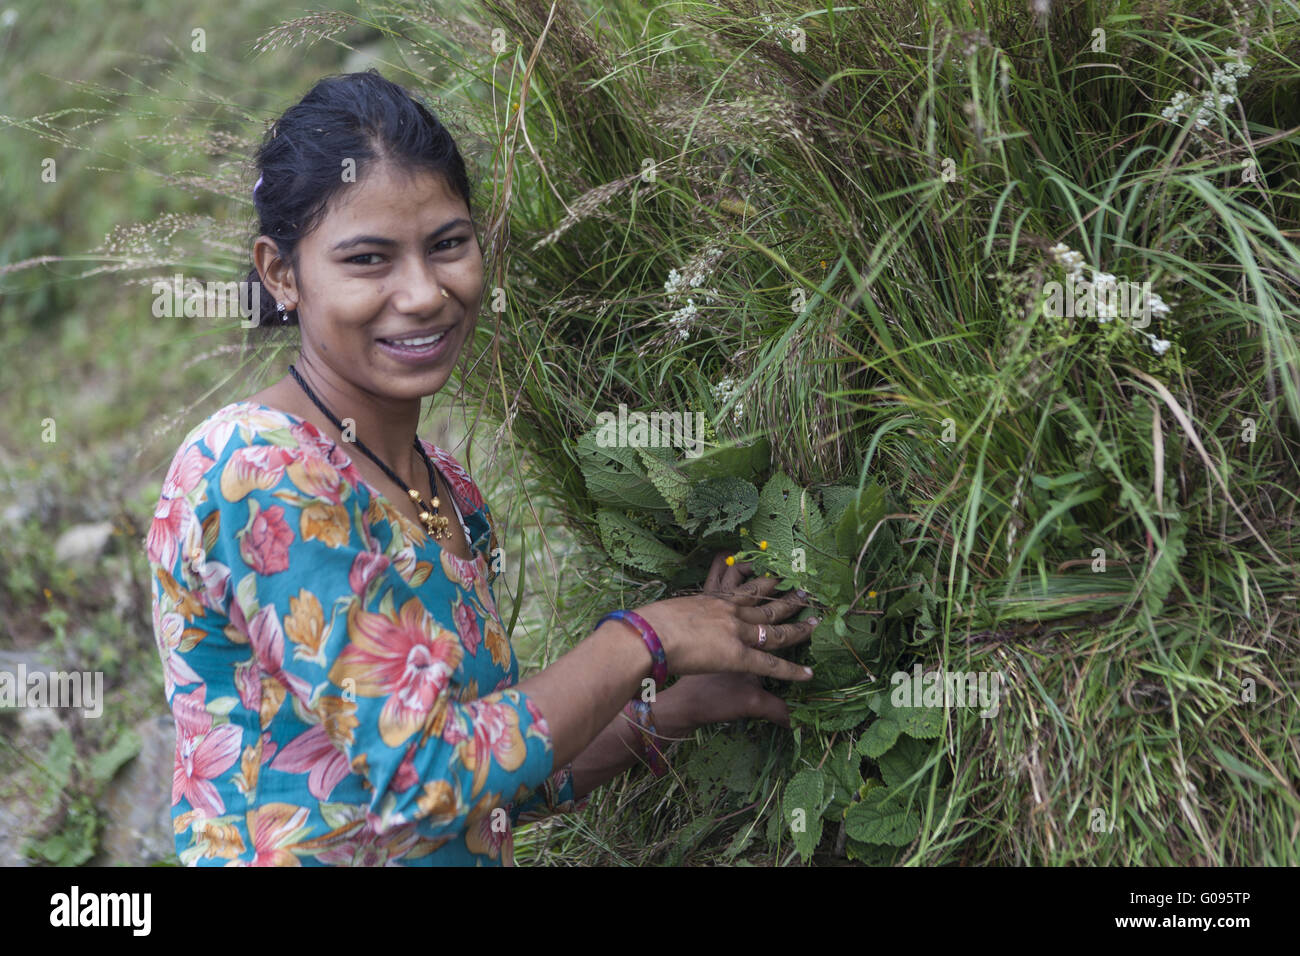 Indian woman with hay bale, North india Stock Photo